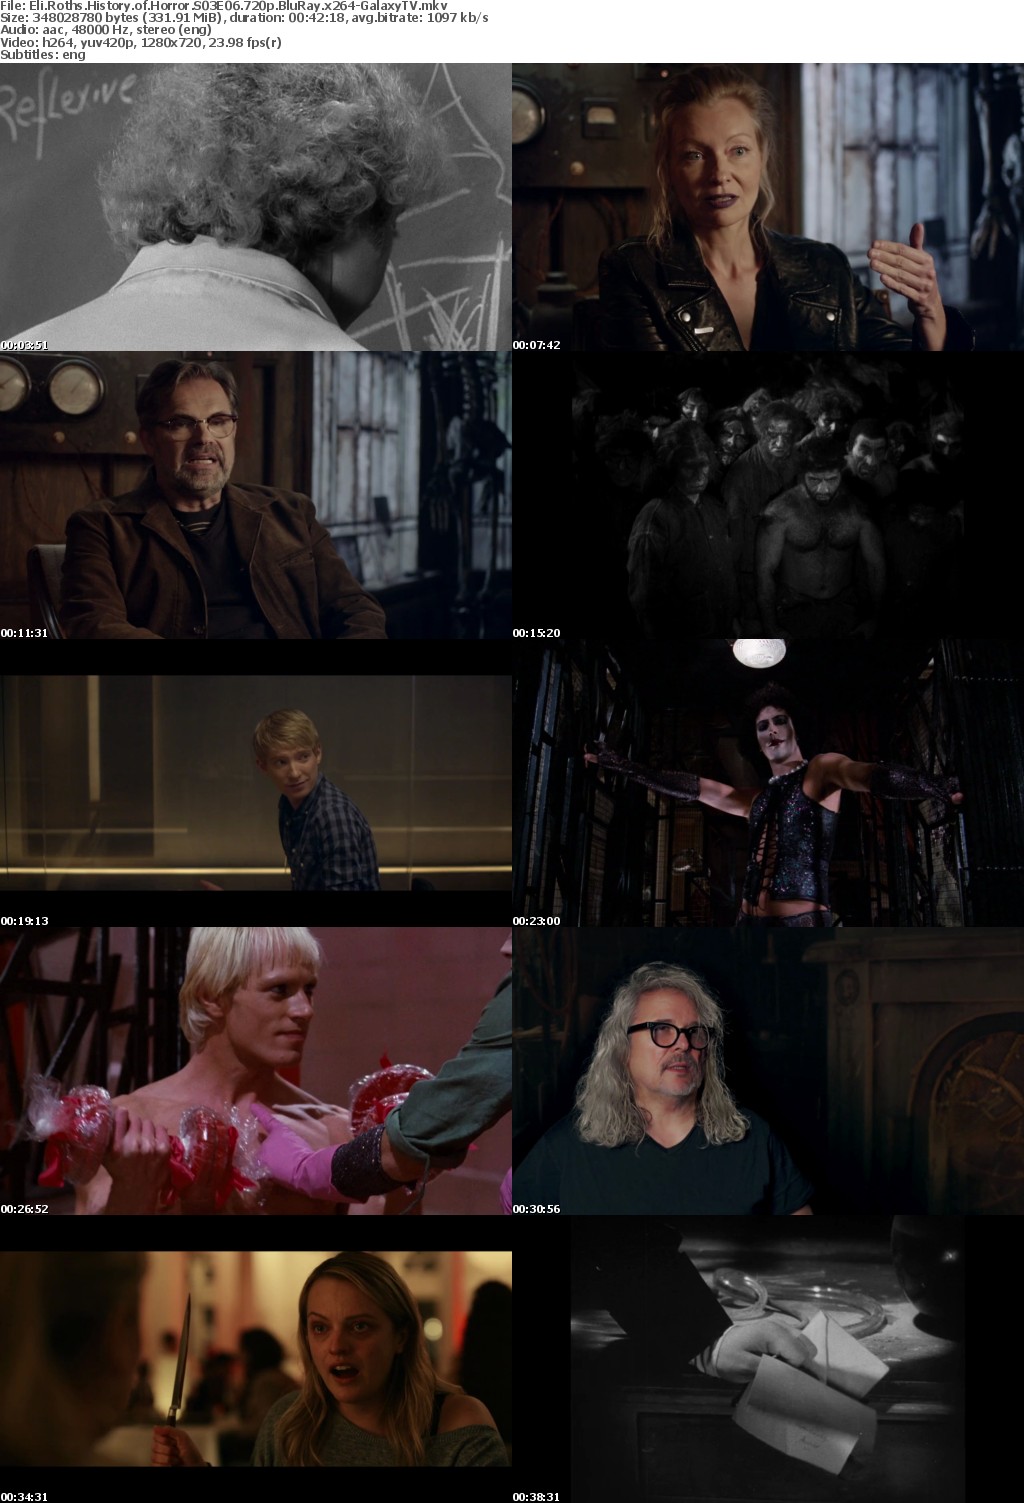 Eli Roths History of Horror S03 COMPLETE 720p BluRay x264-GalaxyTV